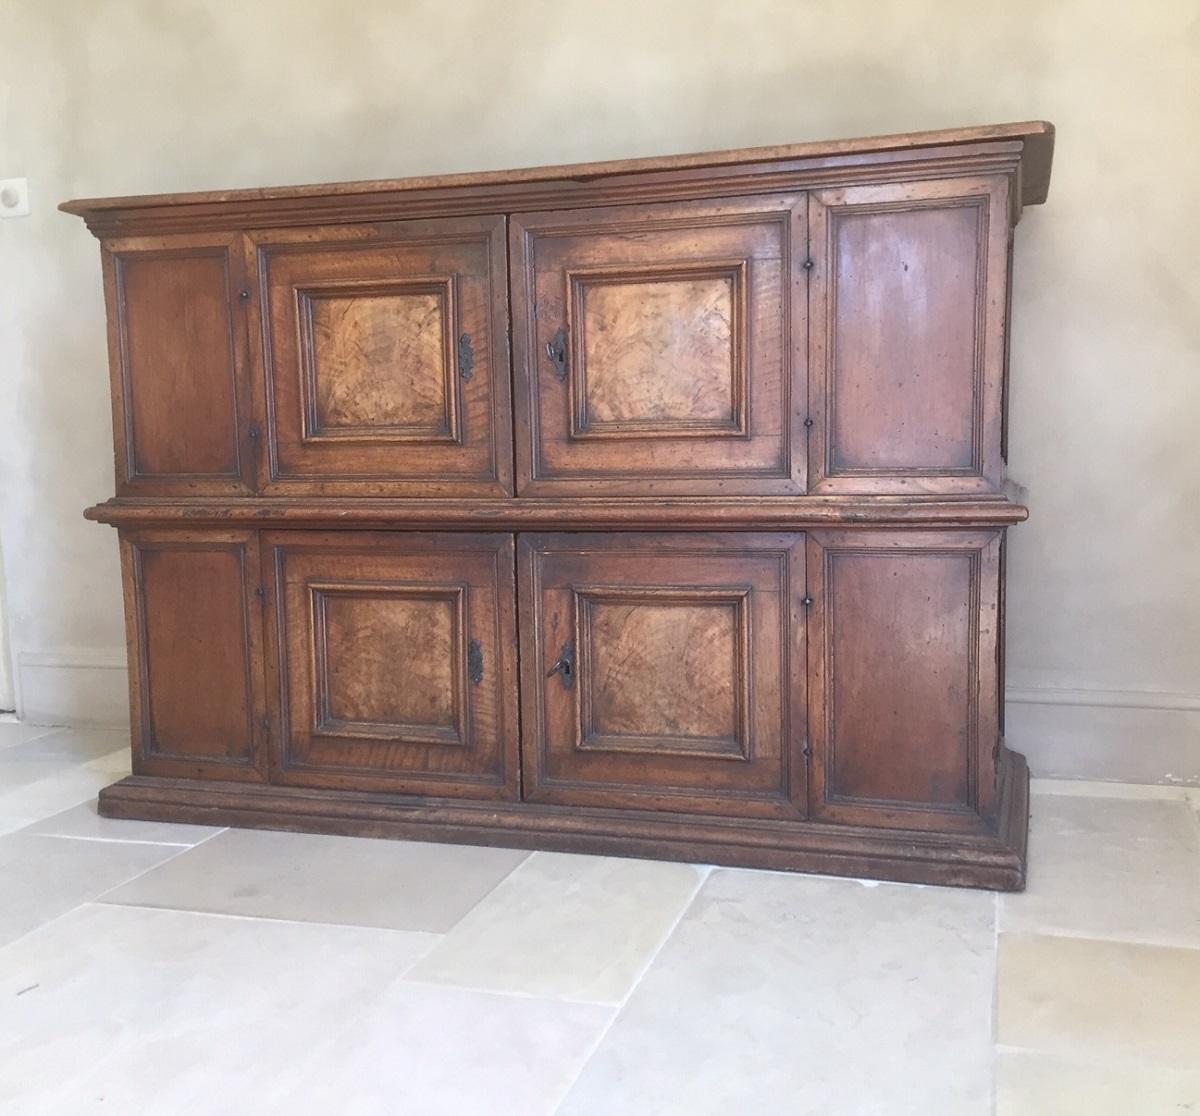 A early 17th century Italian credenza cupboard. Beautifully executed in walnut with solid burr walnut panels. The top hinges open and can be closed with a interior lock system.
This type of cupboard is to be situated in the very early stages of